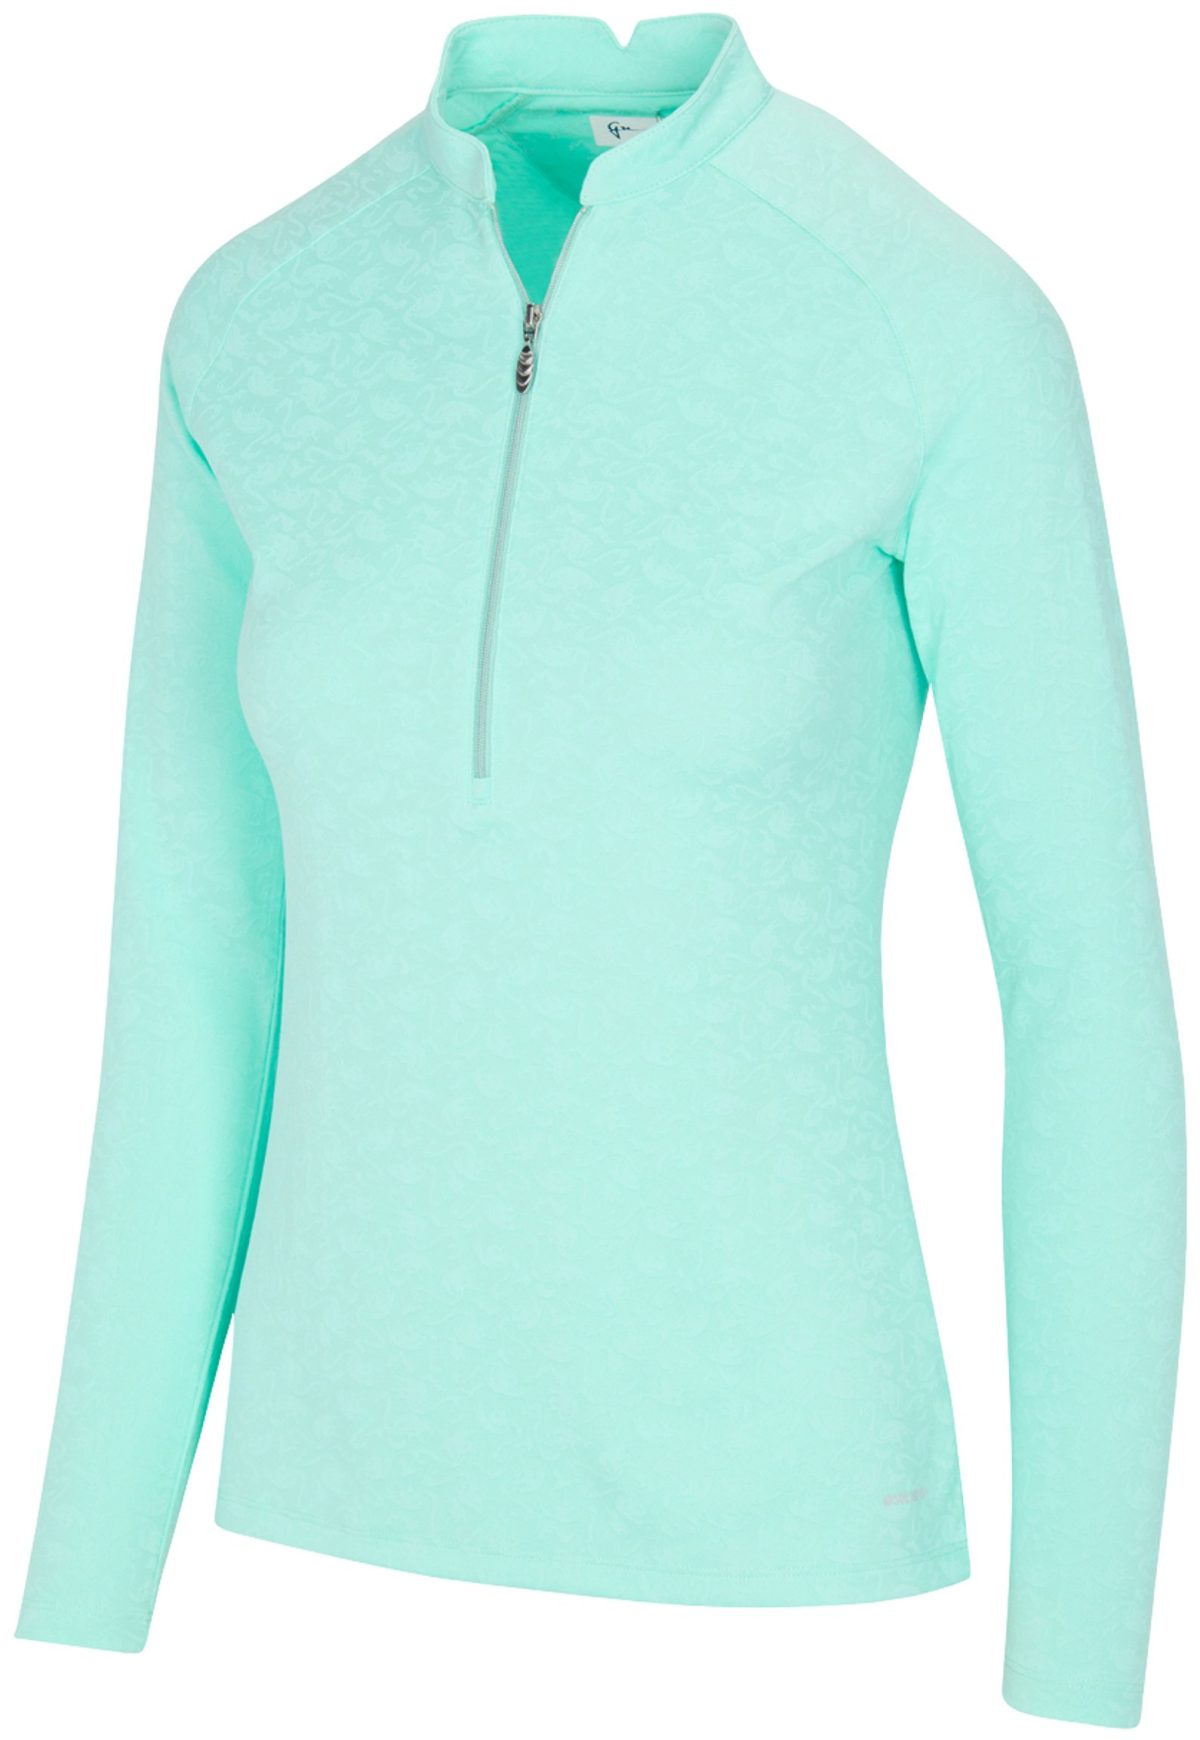 Greg Norman Collection Women's Solar Xp Grotto 1/2 Zip Long Sleeve Golf Top, 100% Polyester in Julep, Size XS